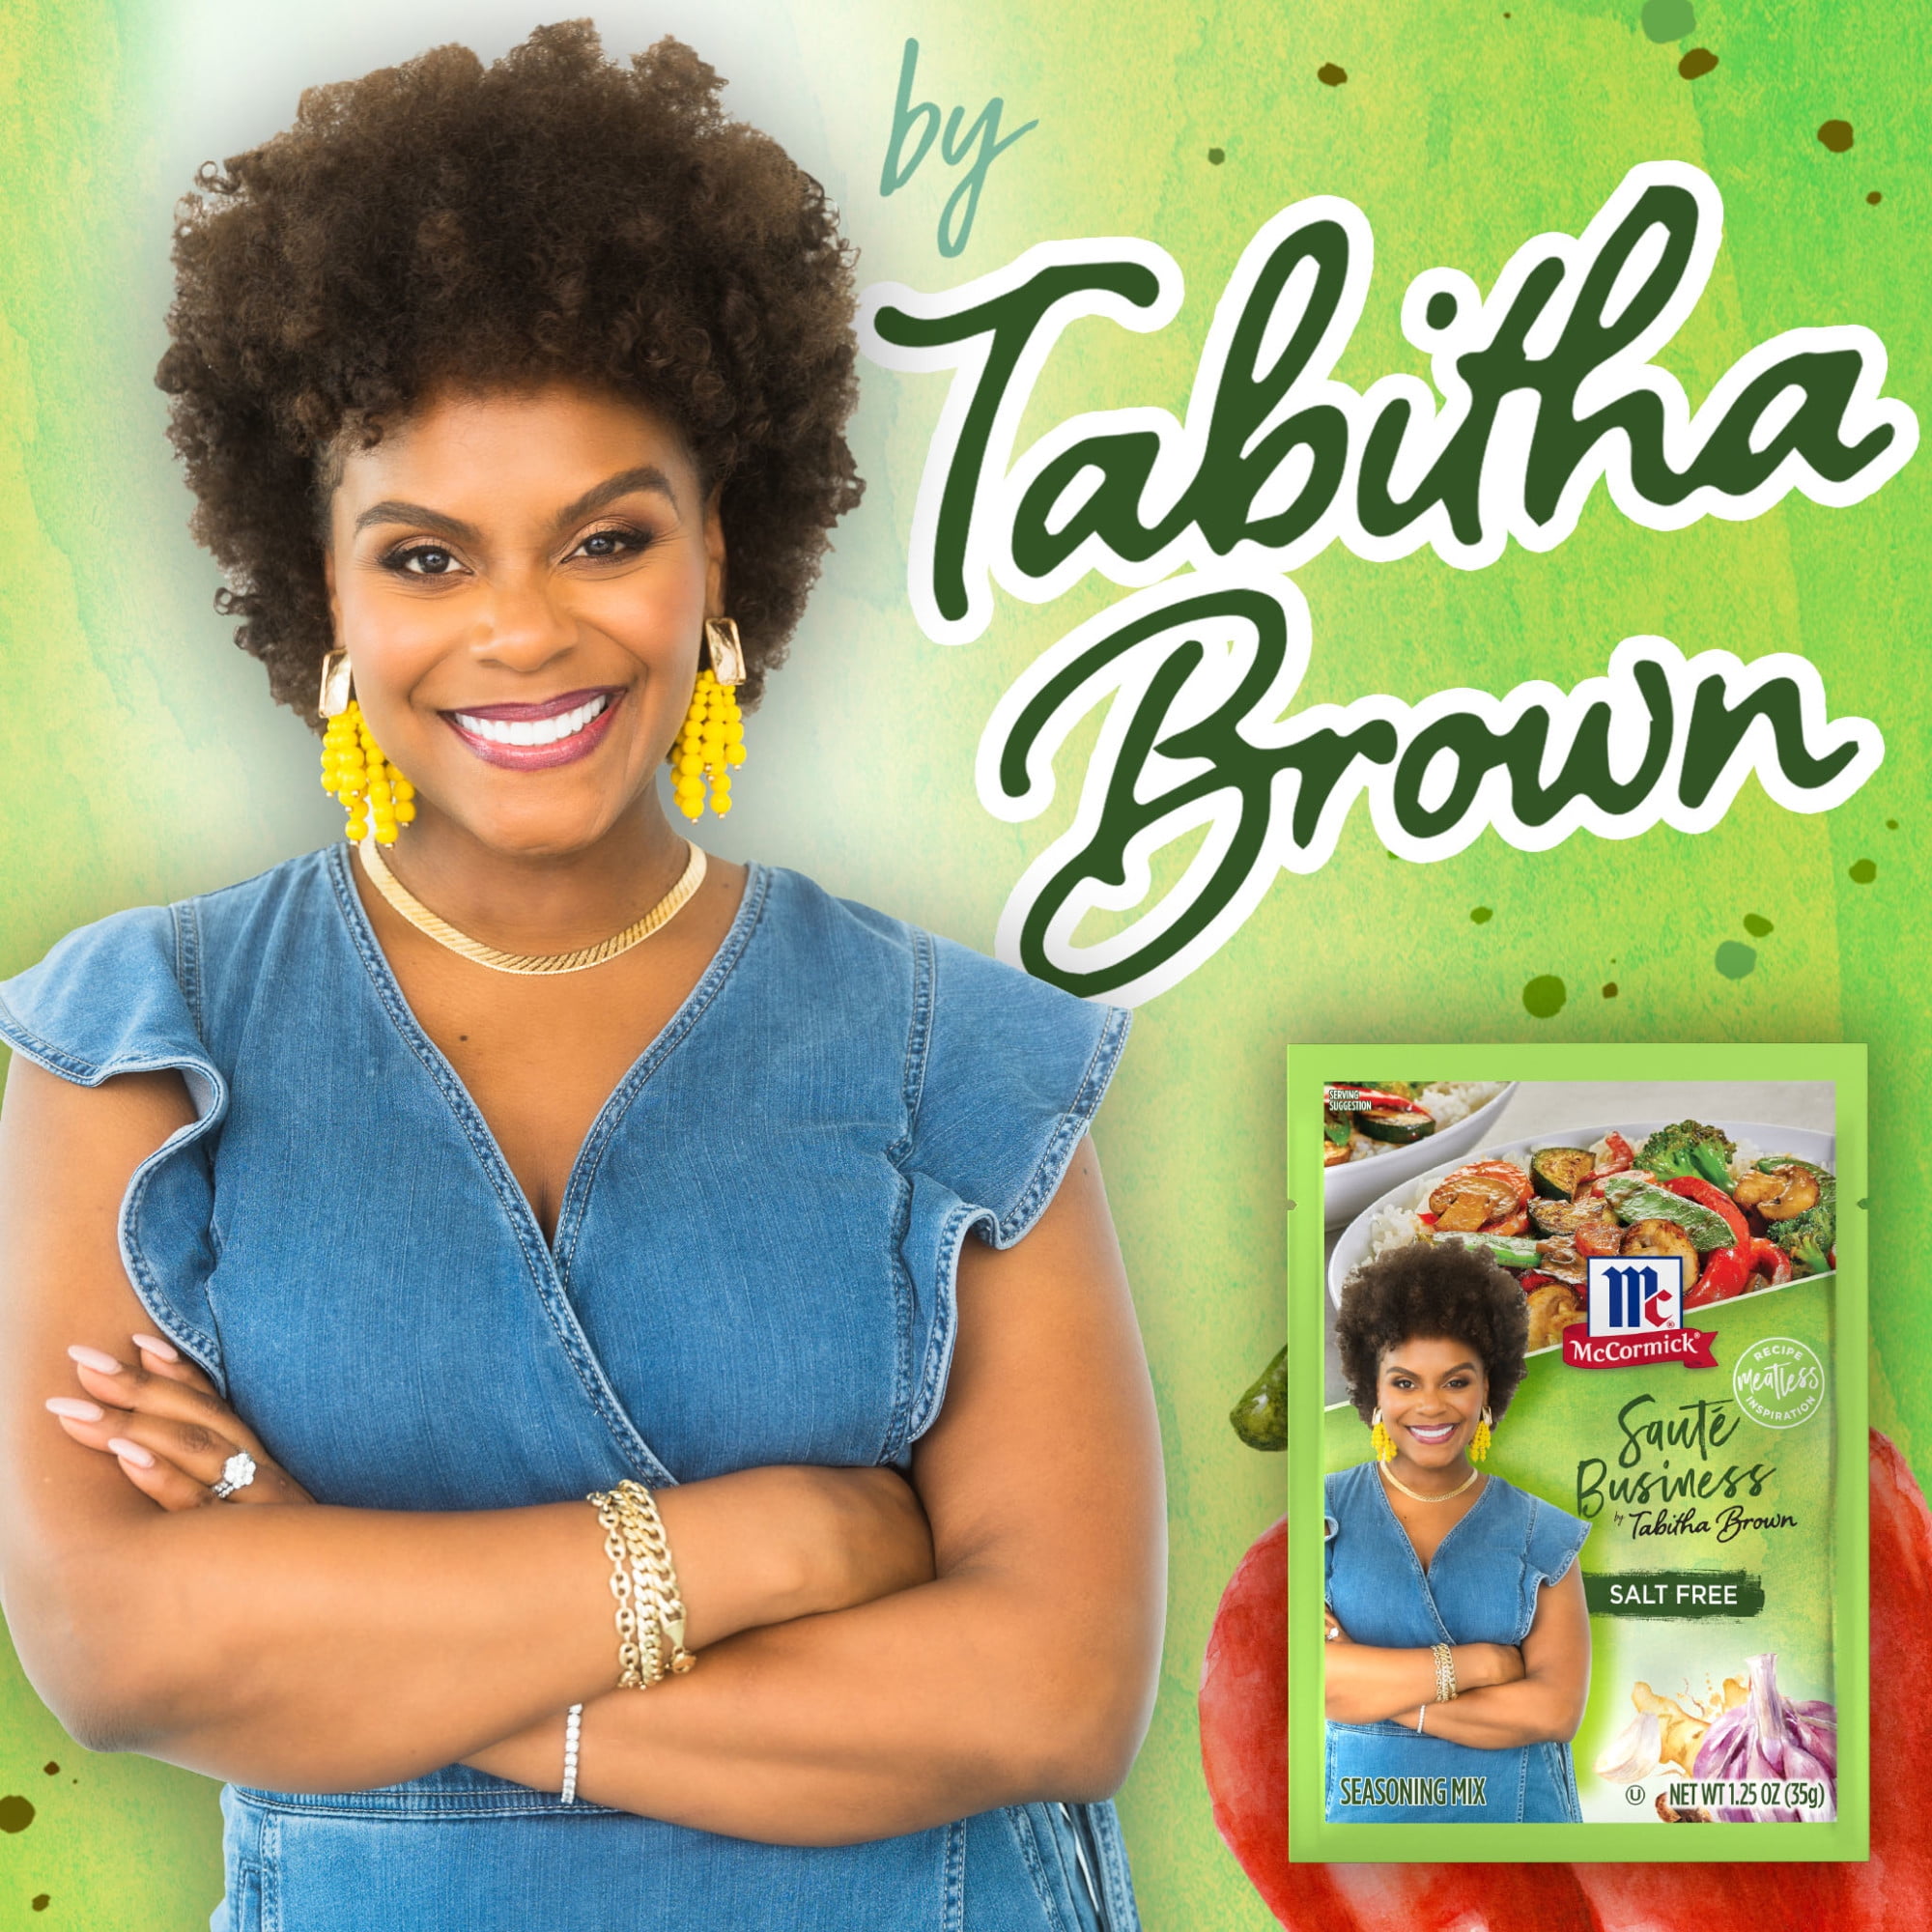 McCormick & Company on LinkedIn: The McCormick® brand and Tabitha Brown are  expanding their partnership to…